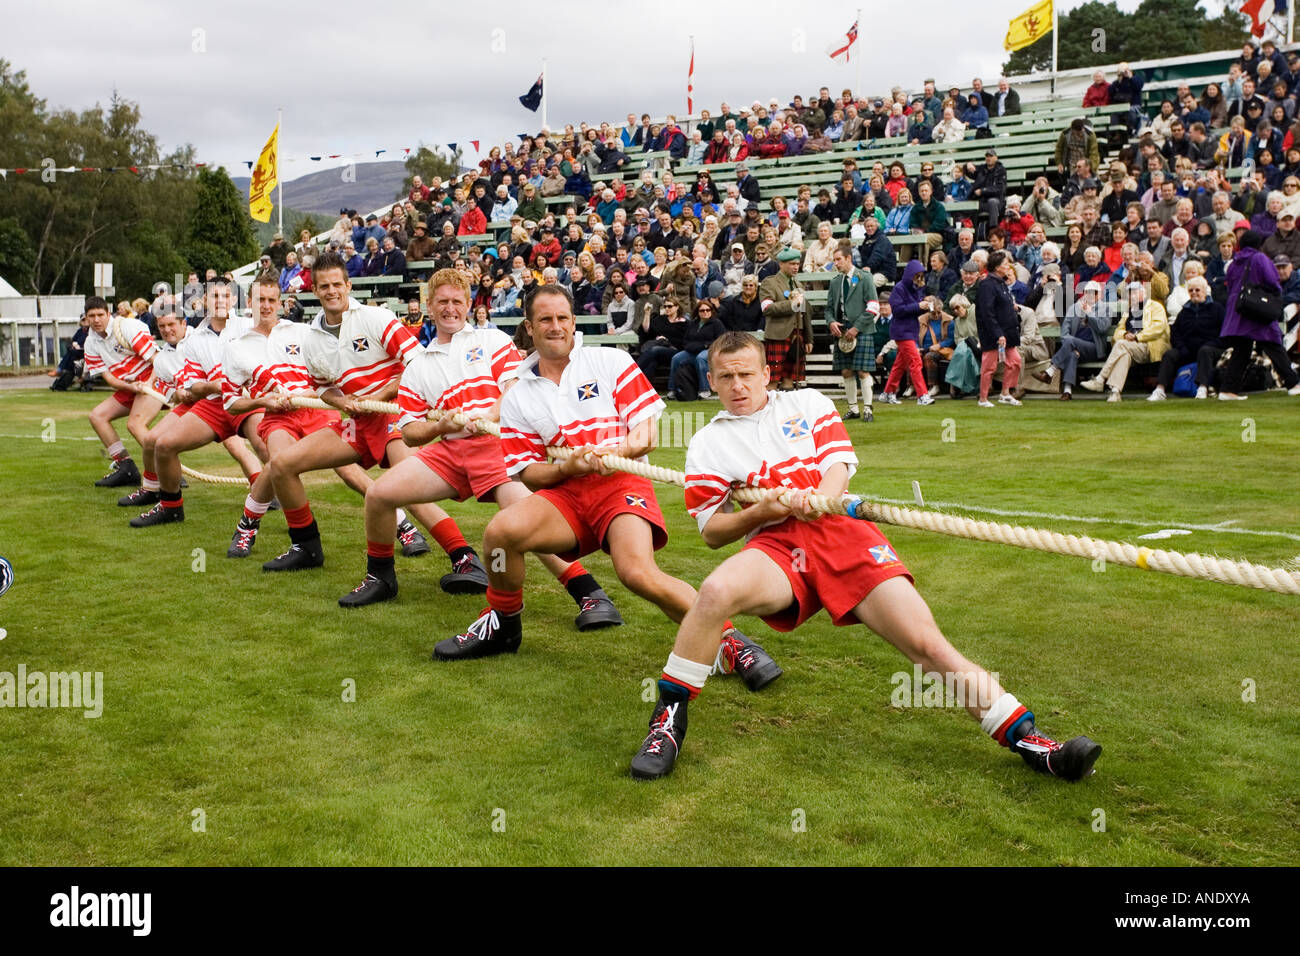 Men compete in Tug Of War contest at the Braemar Games Highland Gathering Scotland UK Stock Photo